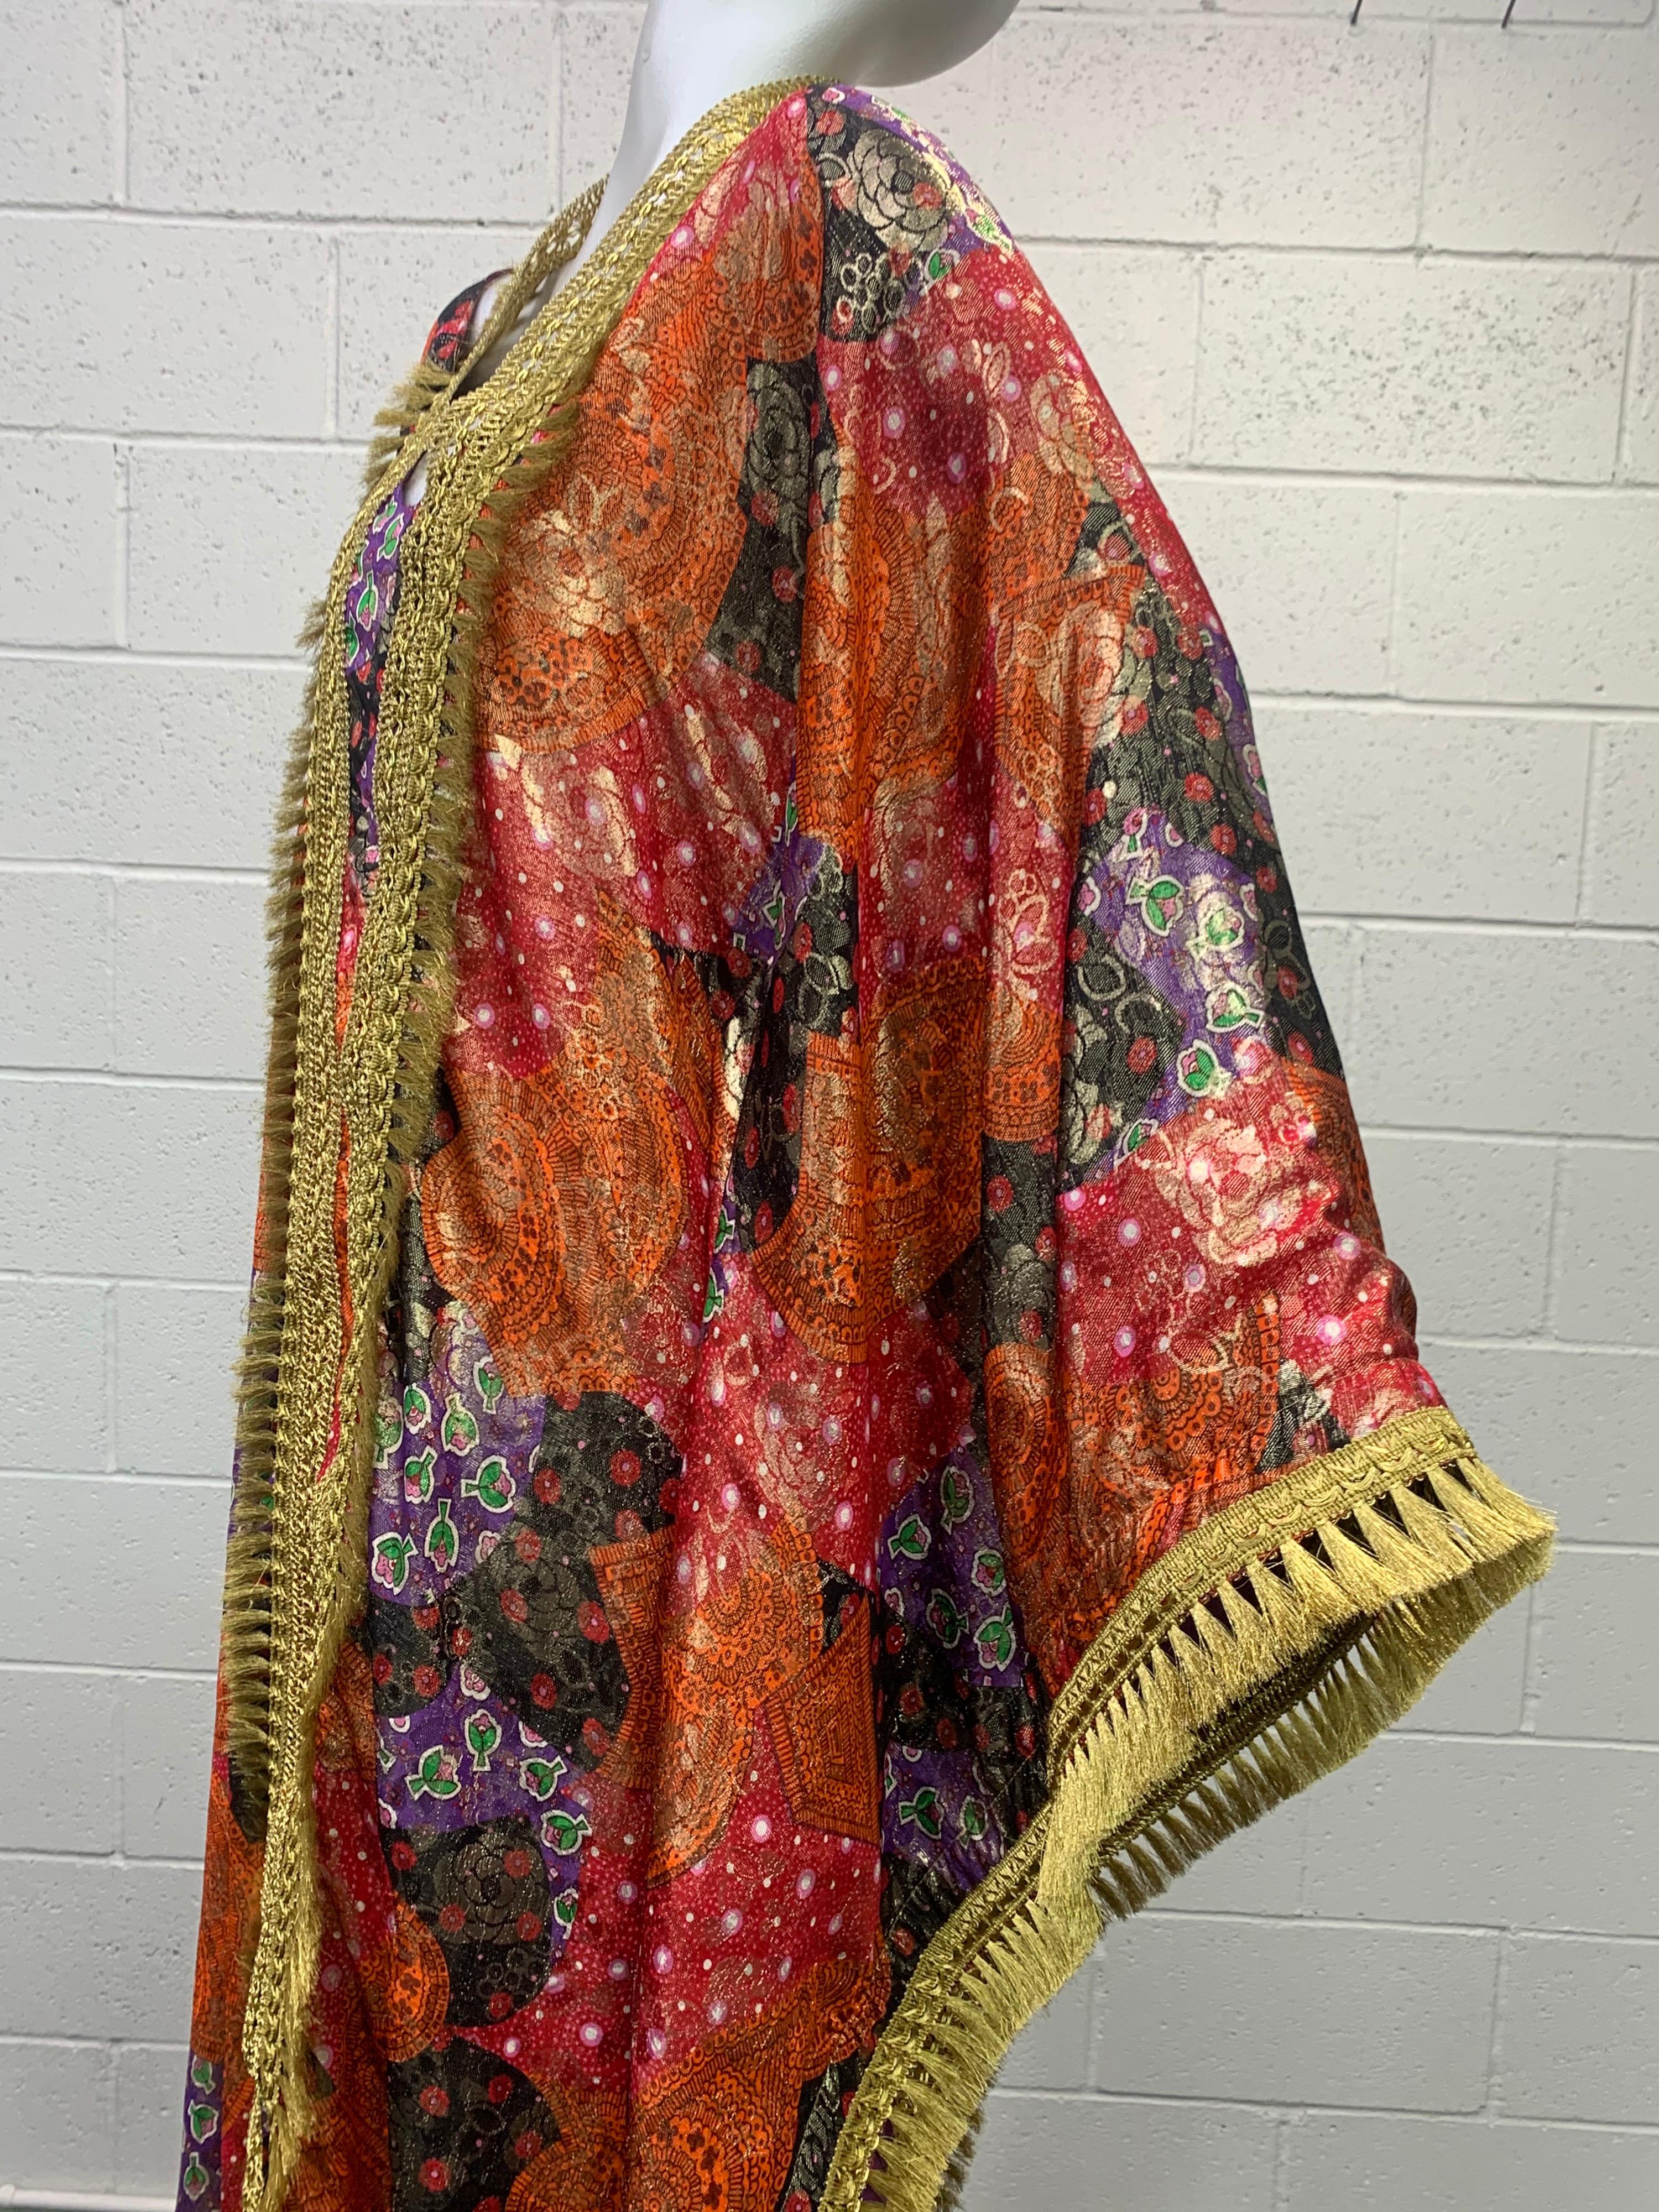 1960's Exotic gold brocade floral print voluminous Caftan features heavy brass braid trim and brass tassel at sleeves and bodice . The brocade fabric features vibrant colors of orange, red, purple , black and green in a floral motif design.

The